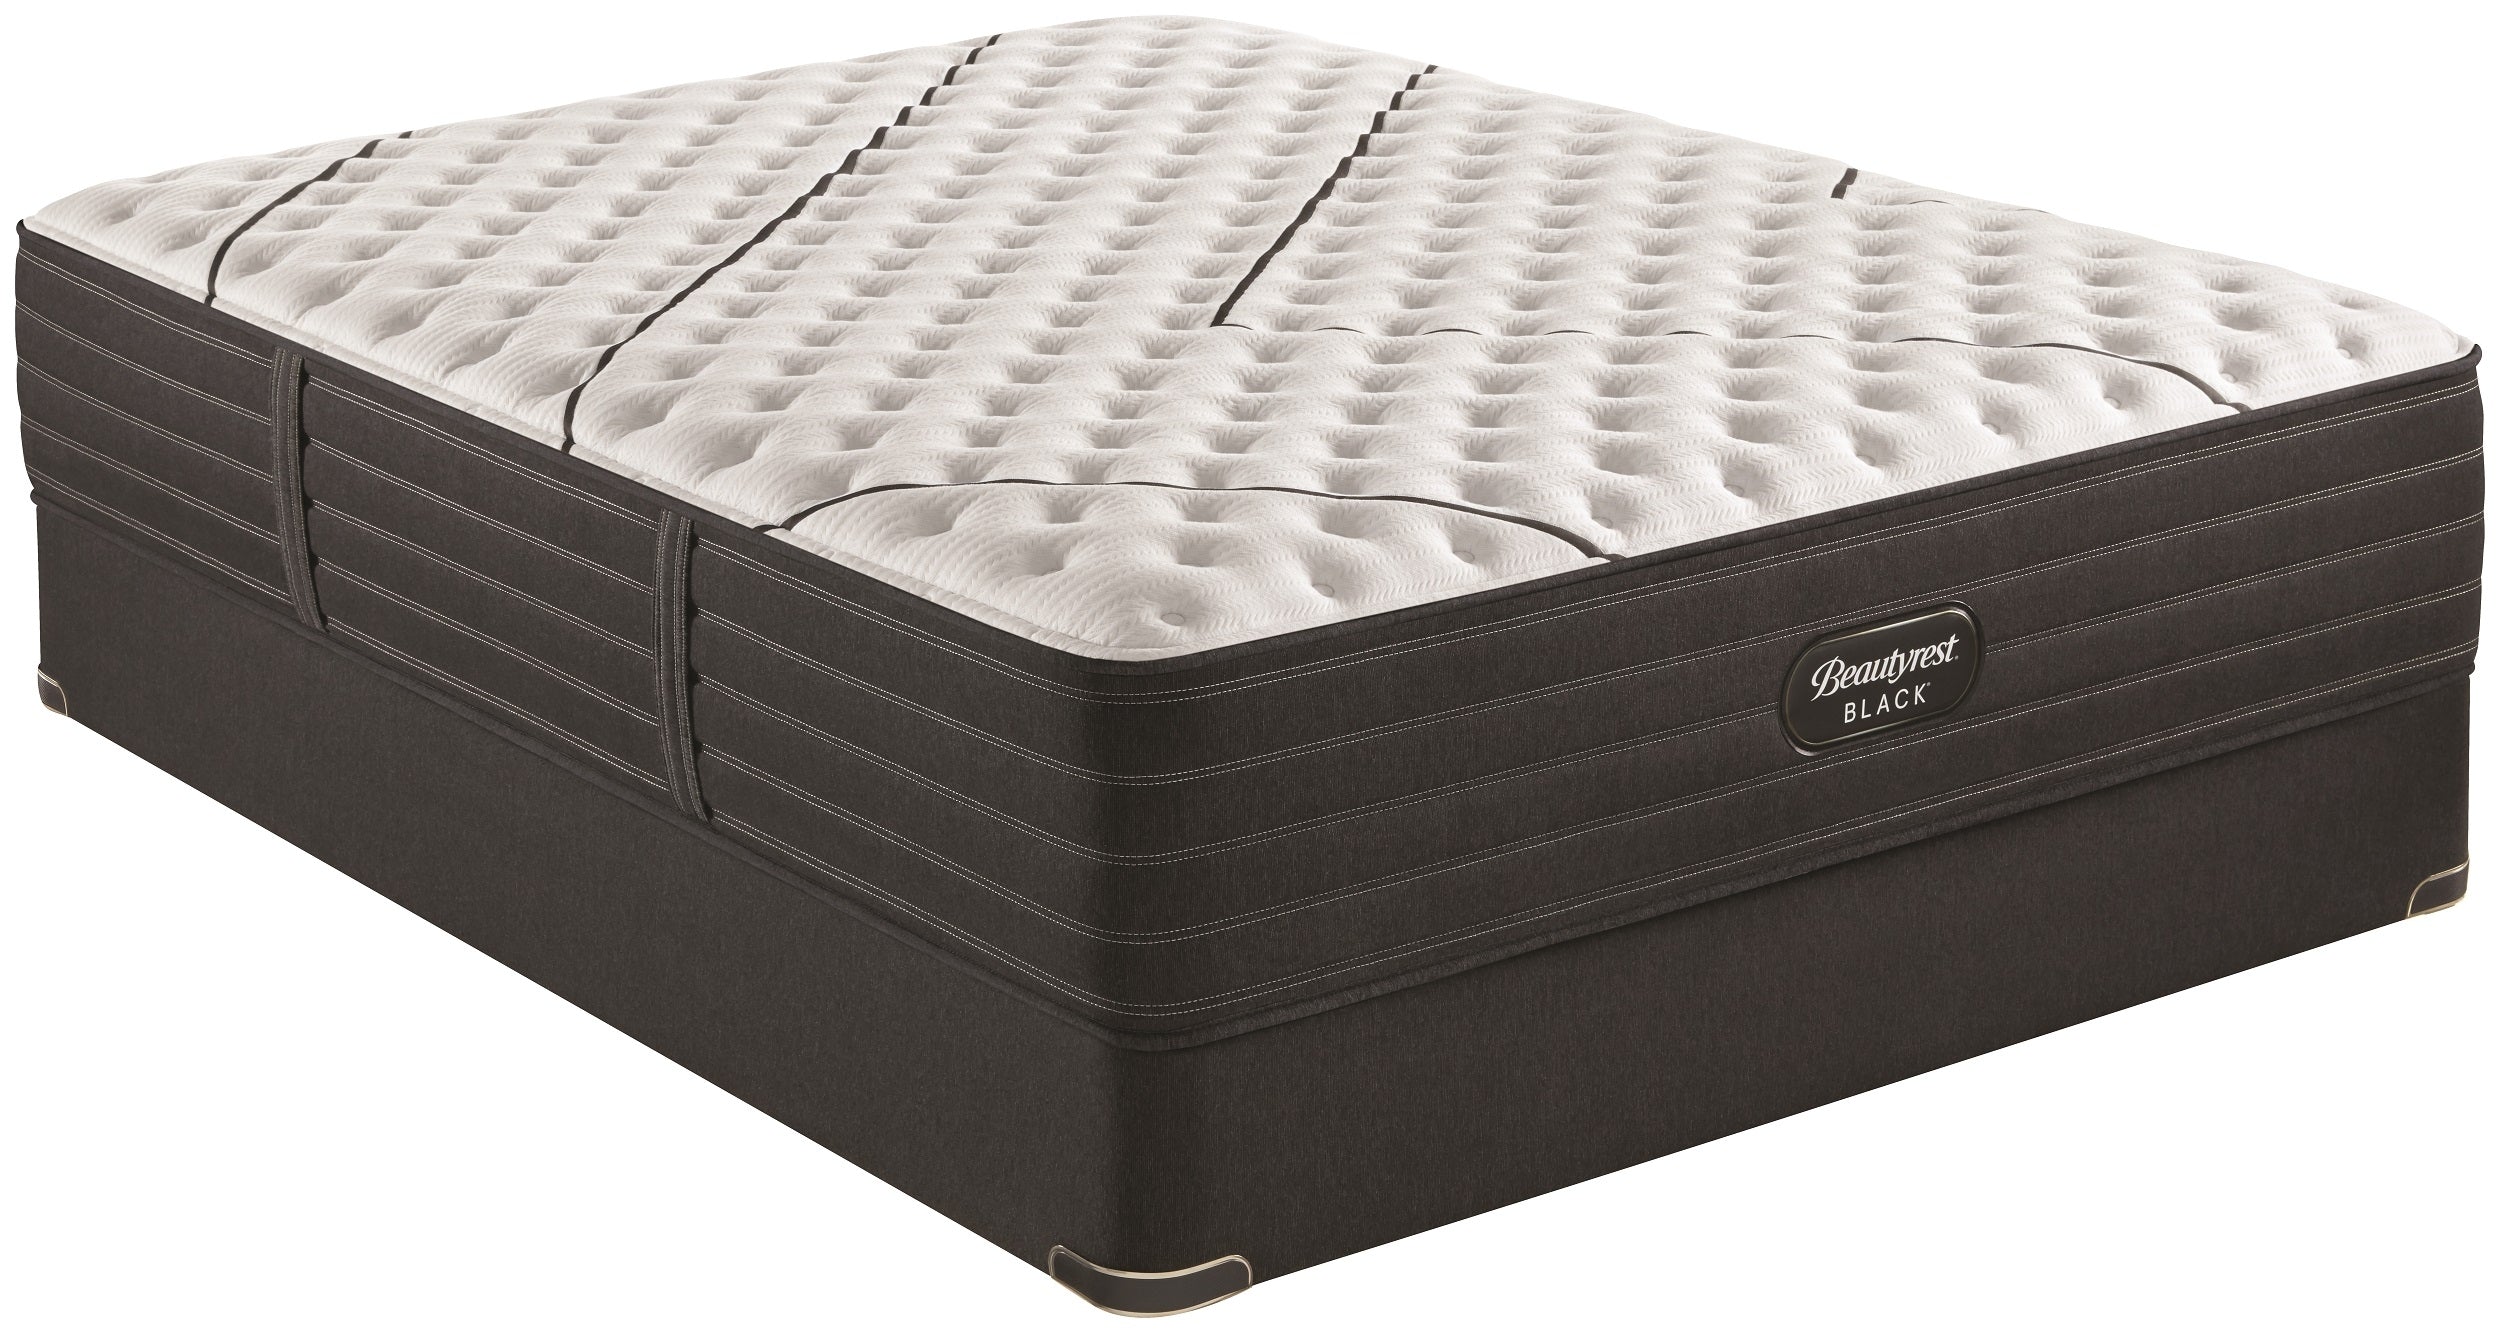 Reveal 85+ Striking beautyrest asheville firm twin mattress Most Trending, Most Beautiful, And Most Suitable